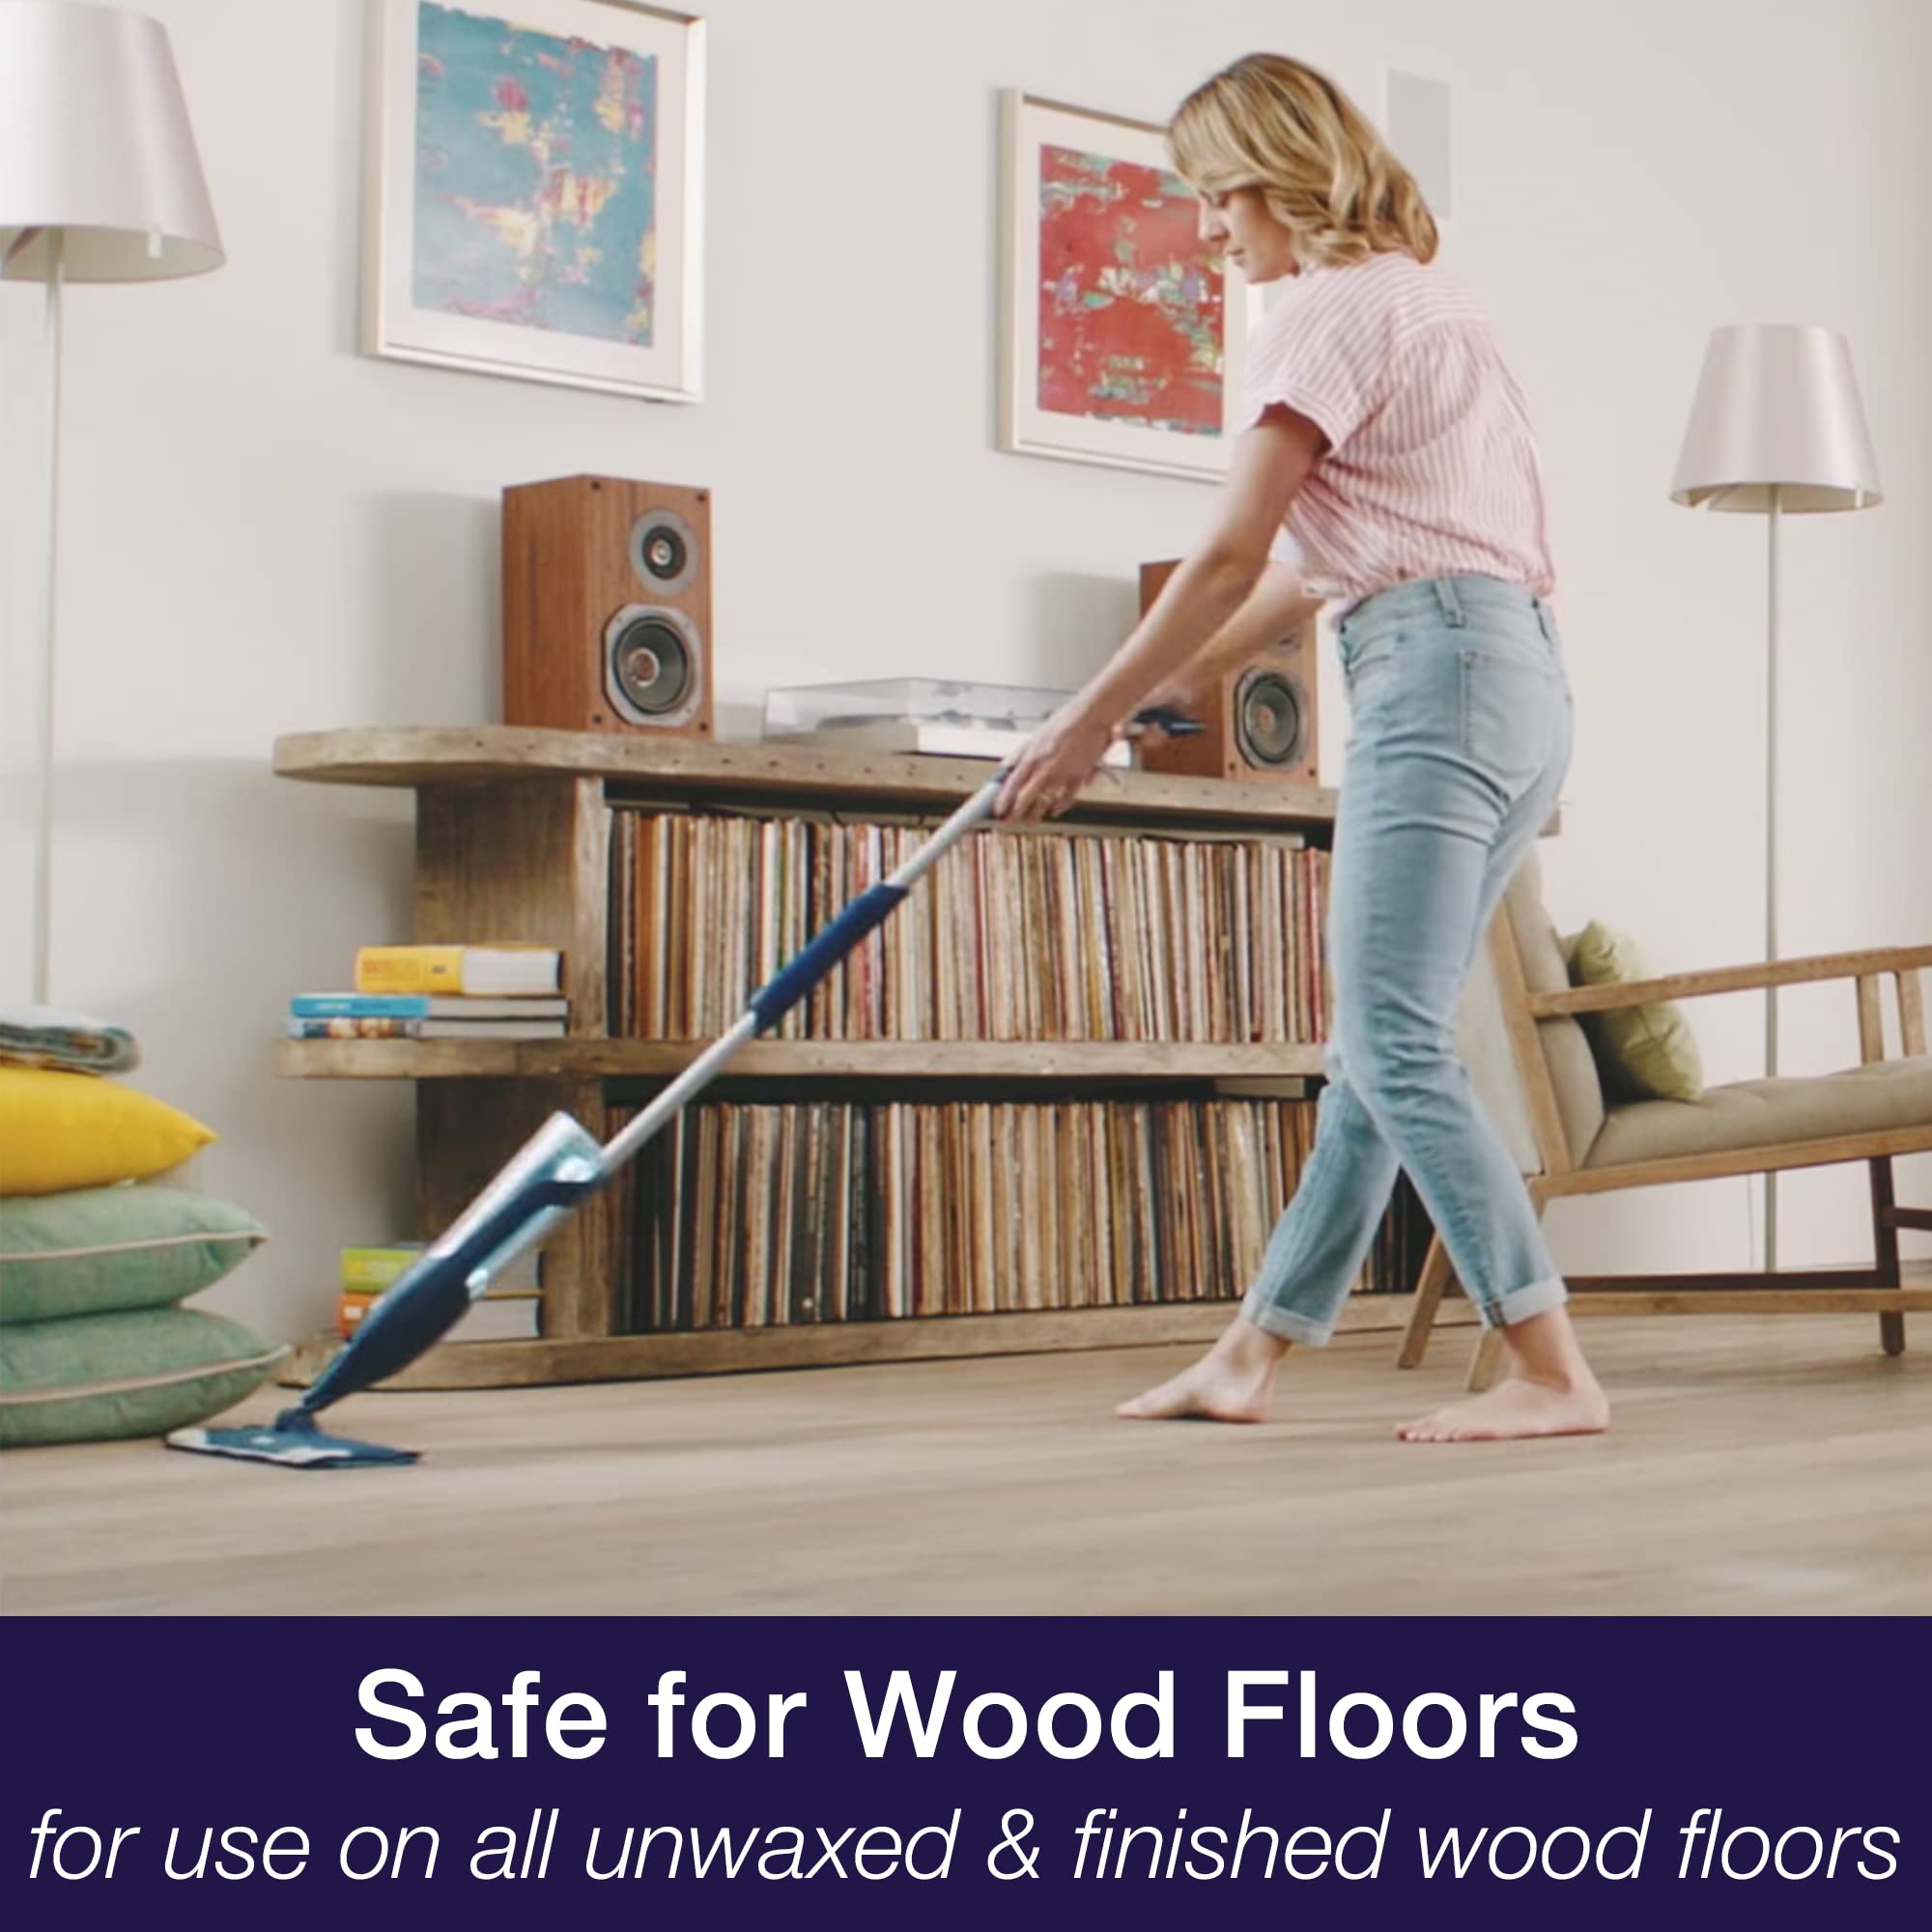 Bona Hardwood Floor Premium Spray Mop - Includes Wood Floor Cleaning Solution and Machine Washable Microfiber Cleaning Pad - Dual Zone Cleaning Design for Faster Cleanup